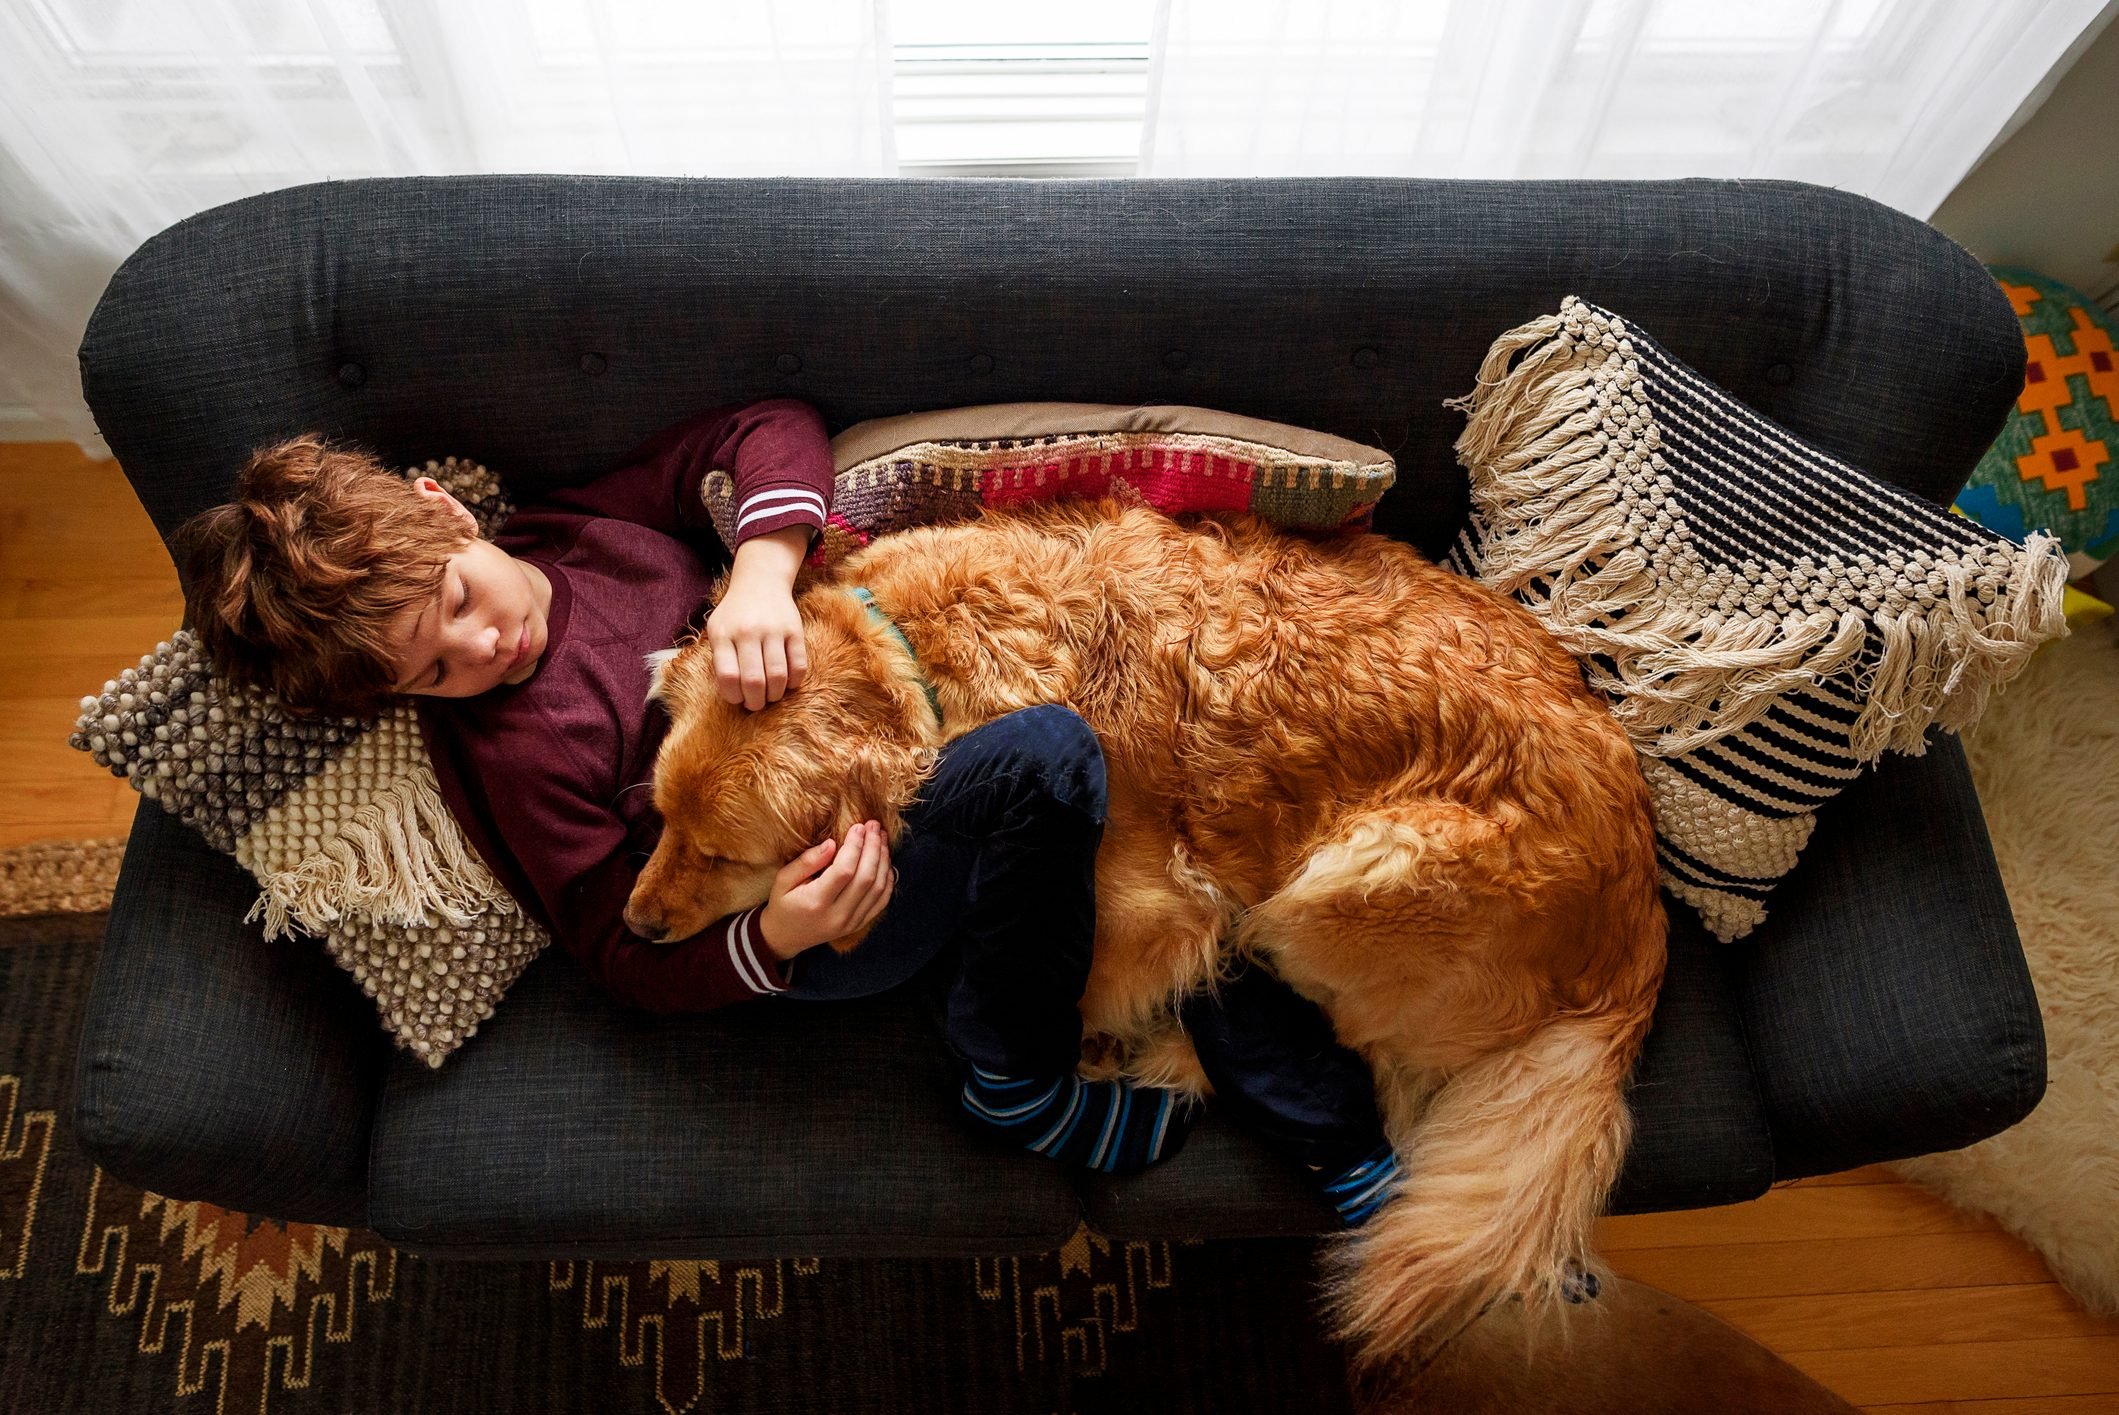 <p>Who doesn't love a relaxing <a href="https://www.rd.com/article/cuddling-with-dog/" rel="noopener noreferrer">cuddle session</a> with their dog? Happy dogs seek physical contact with their owners, like snuggling up to you on the couch or nudging your hand for a pat on the head. Our dog would love to lean his entire body against us when he felt happy and wanted to be close.</p> <p>Every dog is different though, so keep in mind that not every happy dog will want to cuddle or otherwise be close to their owners. Even for the happy dogs that love physical contact, they're not necessarily looking for hours of closeness; just a few minutes may be enough to satisfy their want to be close to you.</p> <p>A dog that's feeling happy but wants to be alone isn't a cause for concern. However, if your dog prefers to be alone and is showing signs of unhappiness or depression, such as changes in eating and sleeping behavior, consider taking your dog to the vet for further evaluation.</p>